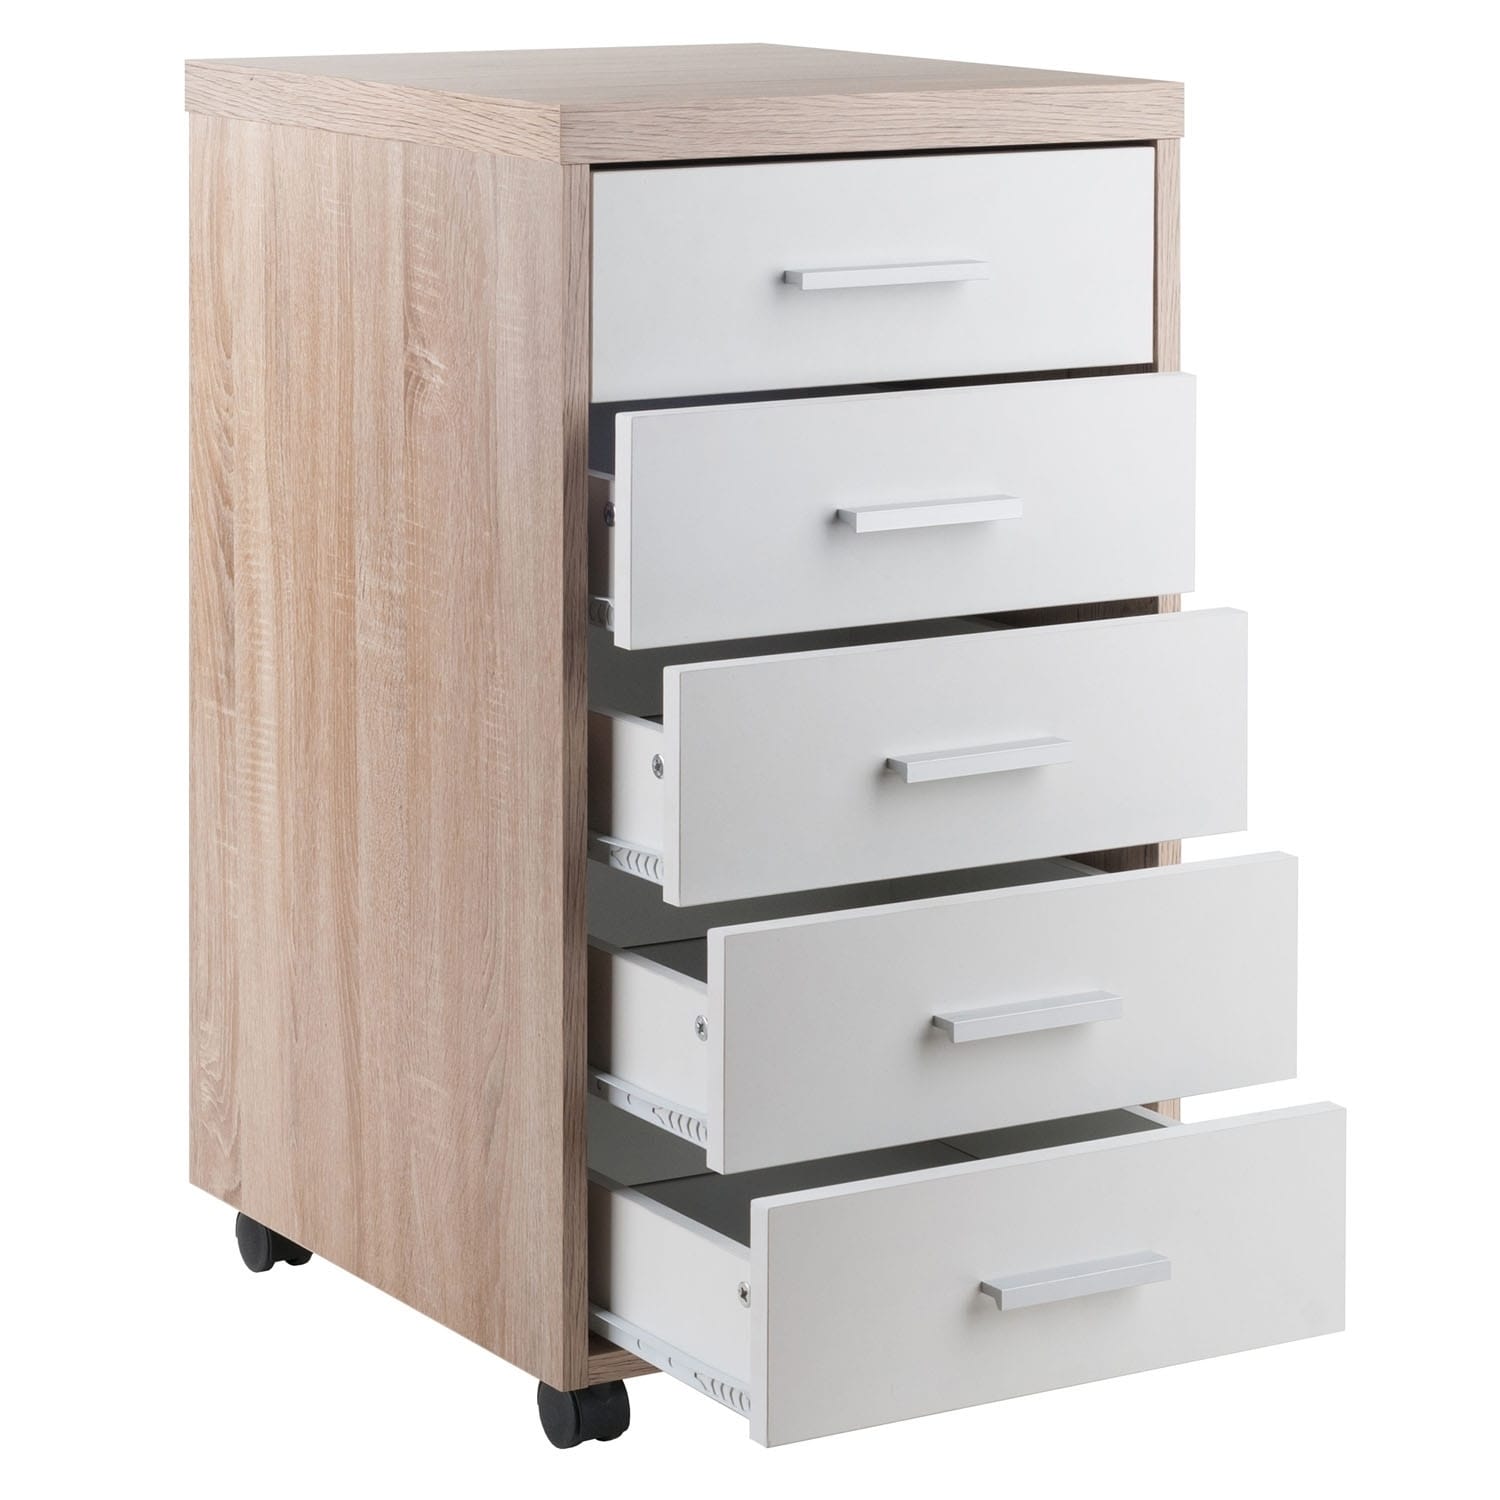 Winsome Kenner Mobile Storage Cabinet With 5 Drawers Reclaimed Wood White 2271dd23 Dd05 495d 86dd 05f6a13e8c4e 